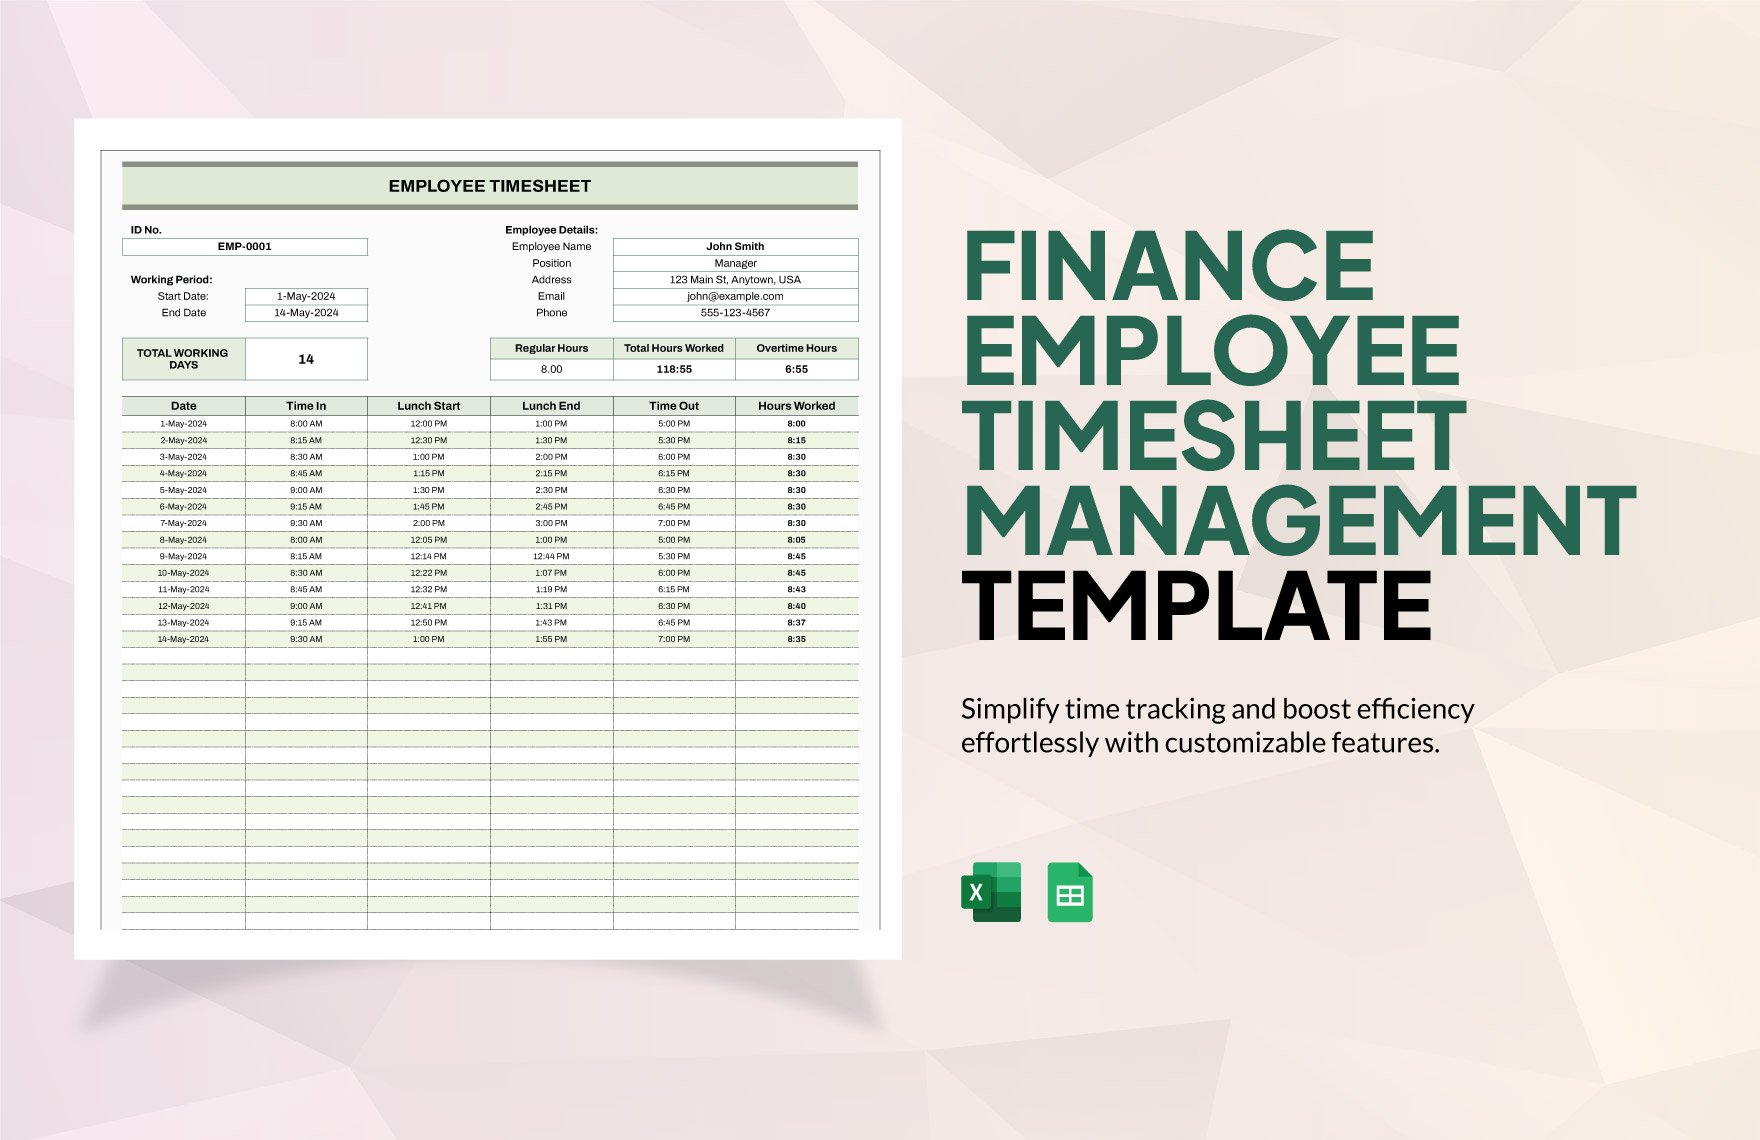 Finance Employee Timesheet Management Template in Excel, Google Sheets